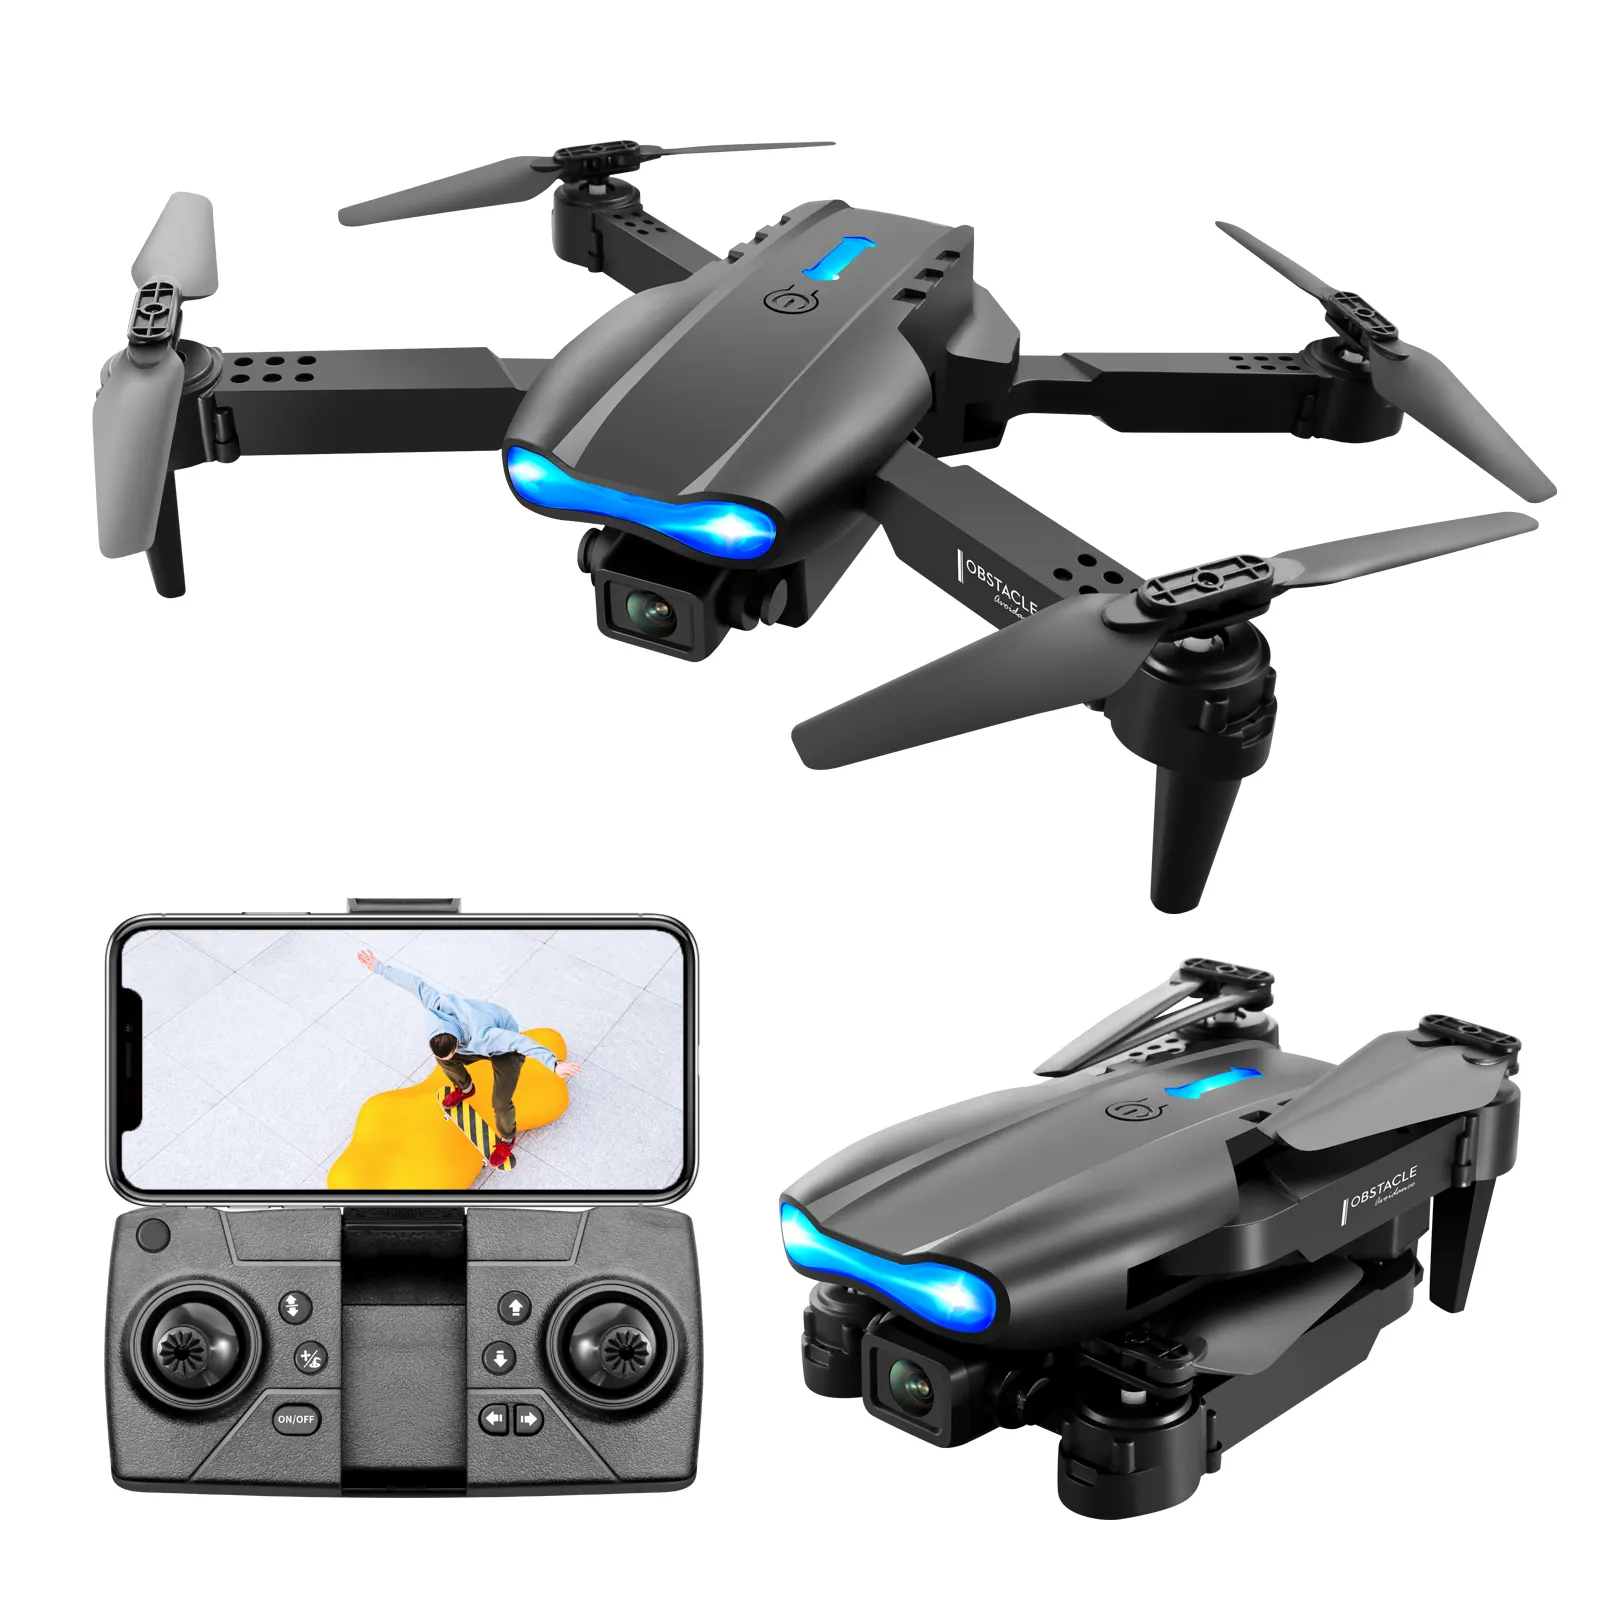 Wholesale Newest E99 Uav Airplane Photography Camera 4k hd Wireless Mapping FPV Drones Con Camara Quadcopter From